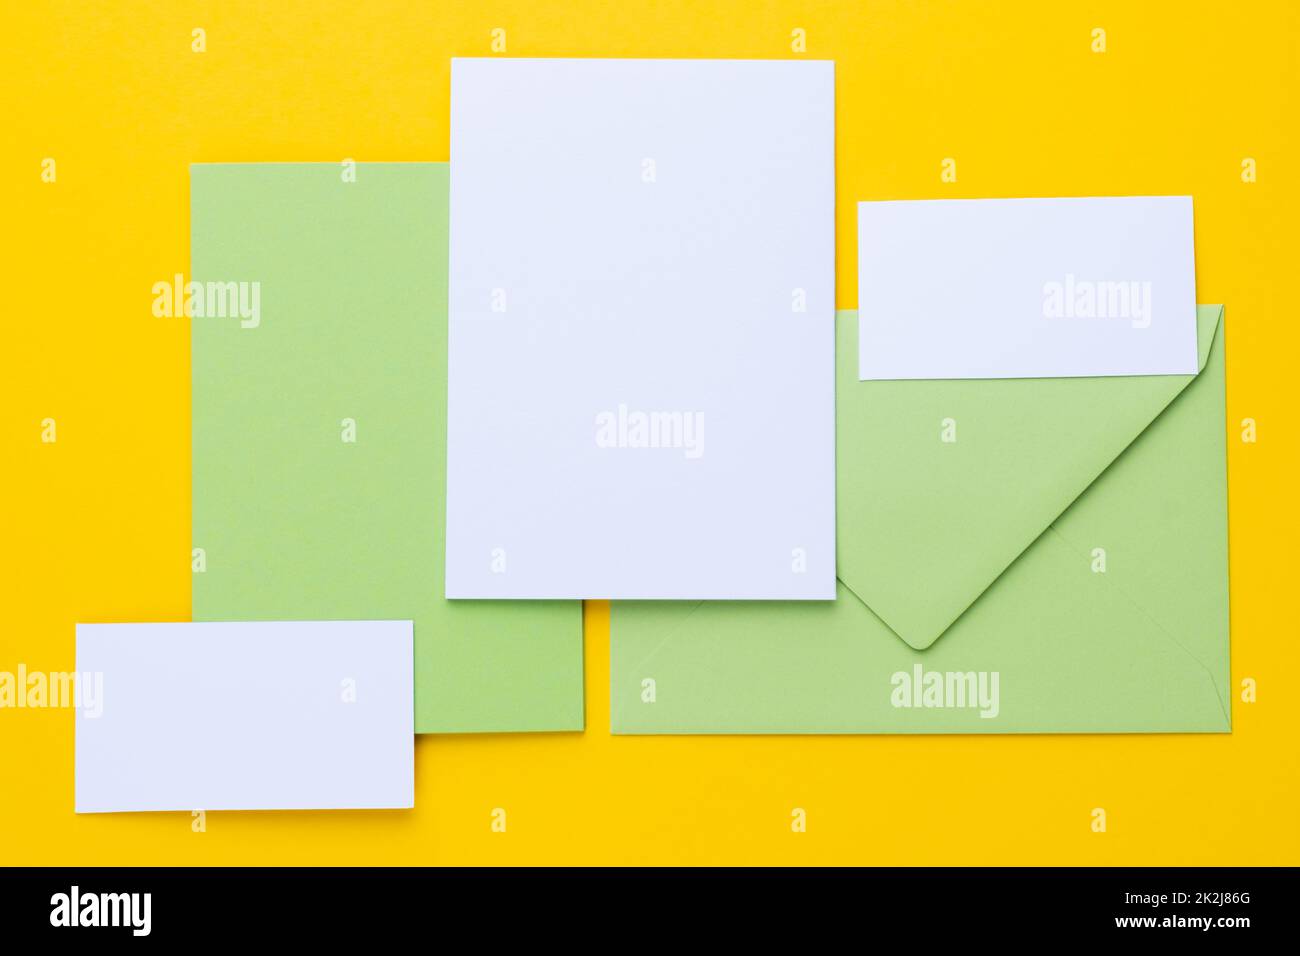 Set of branding elements in spring colour. Mock up for graphic designers presentations or business portfolios. Stock Photo